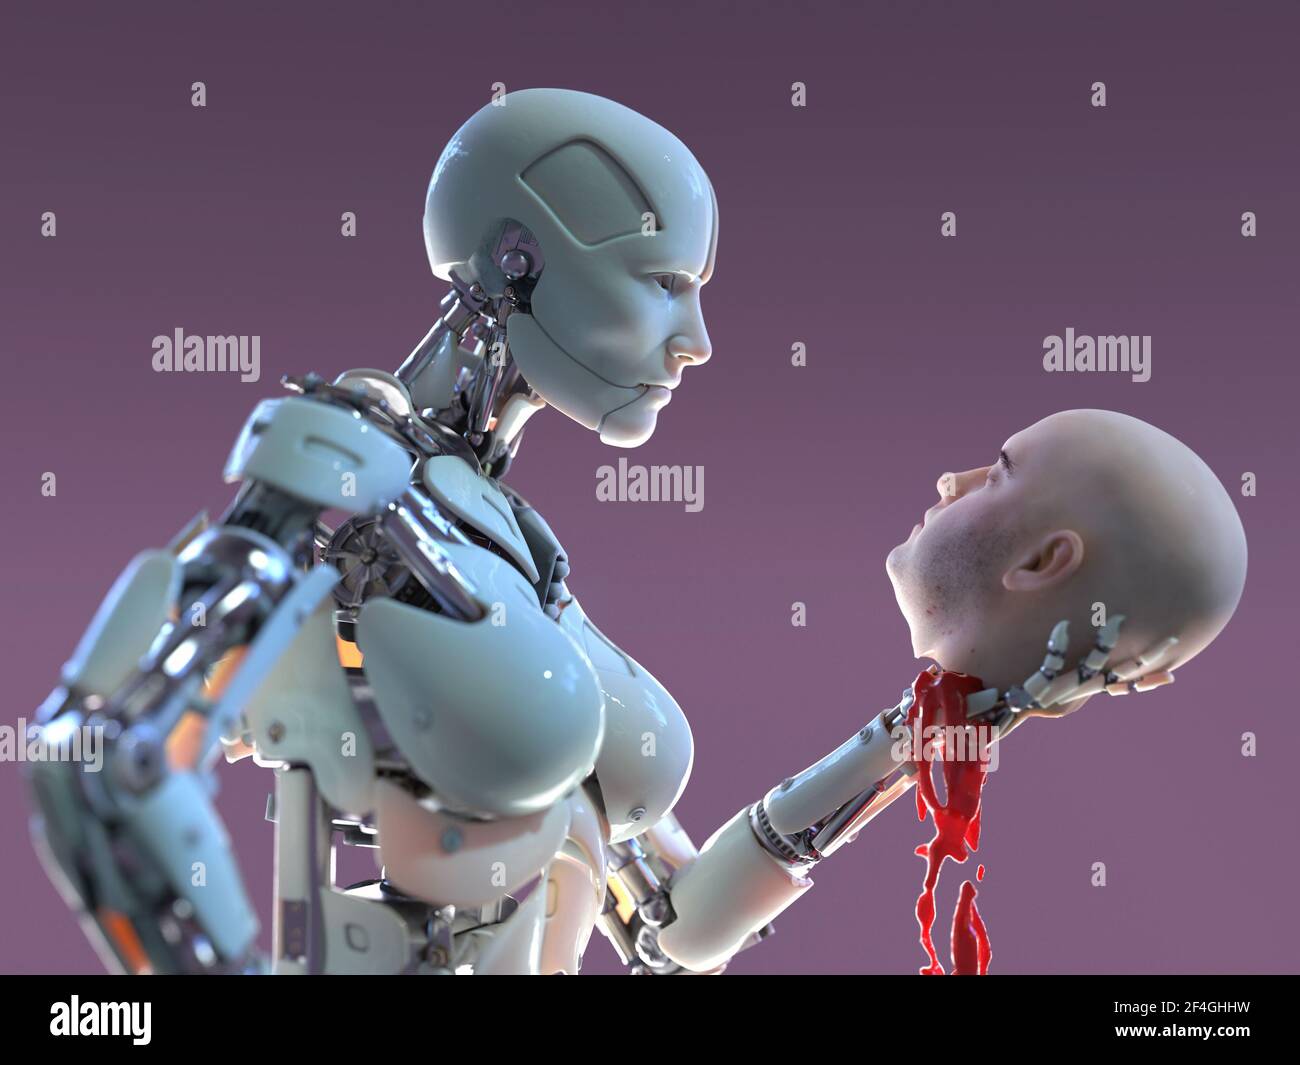 artificial intelligence wins, robot holding a severed human head Stock Photo